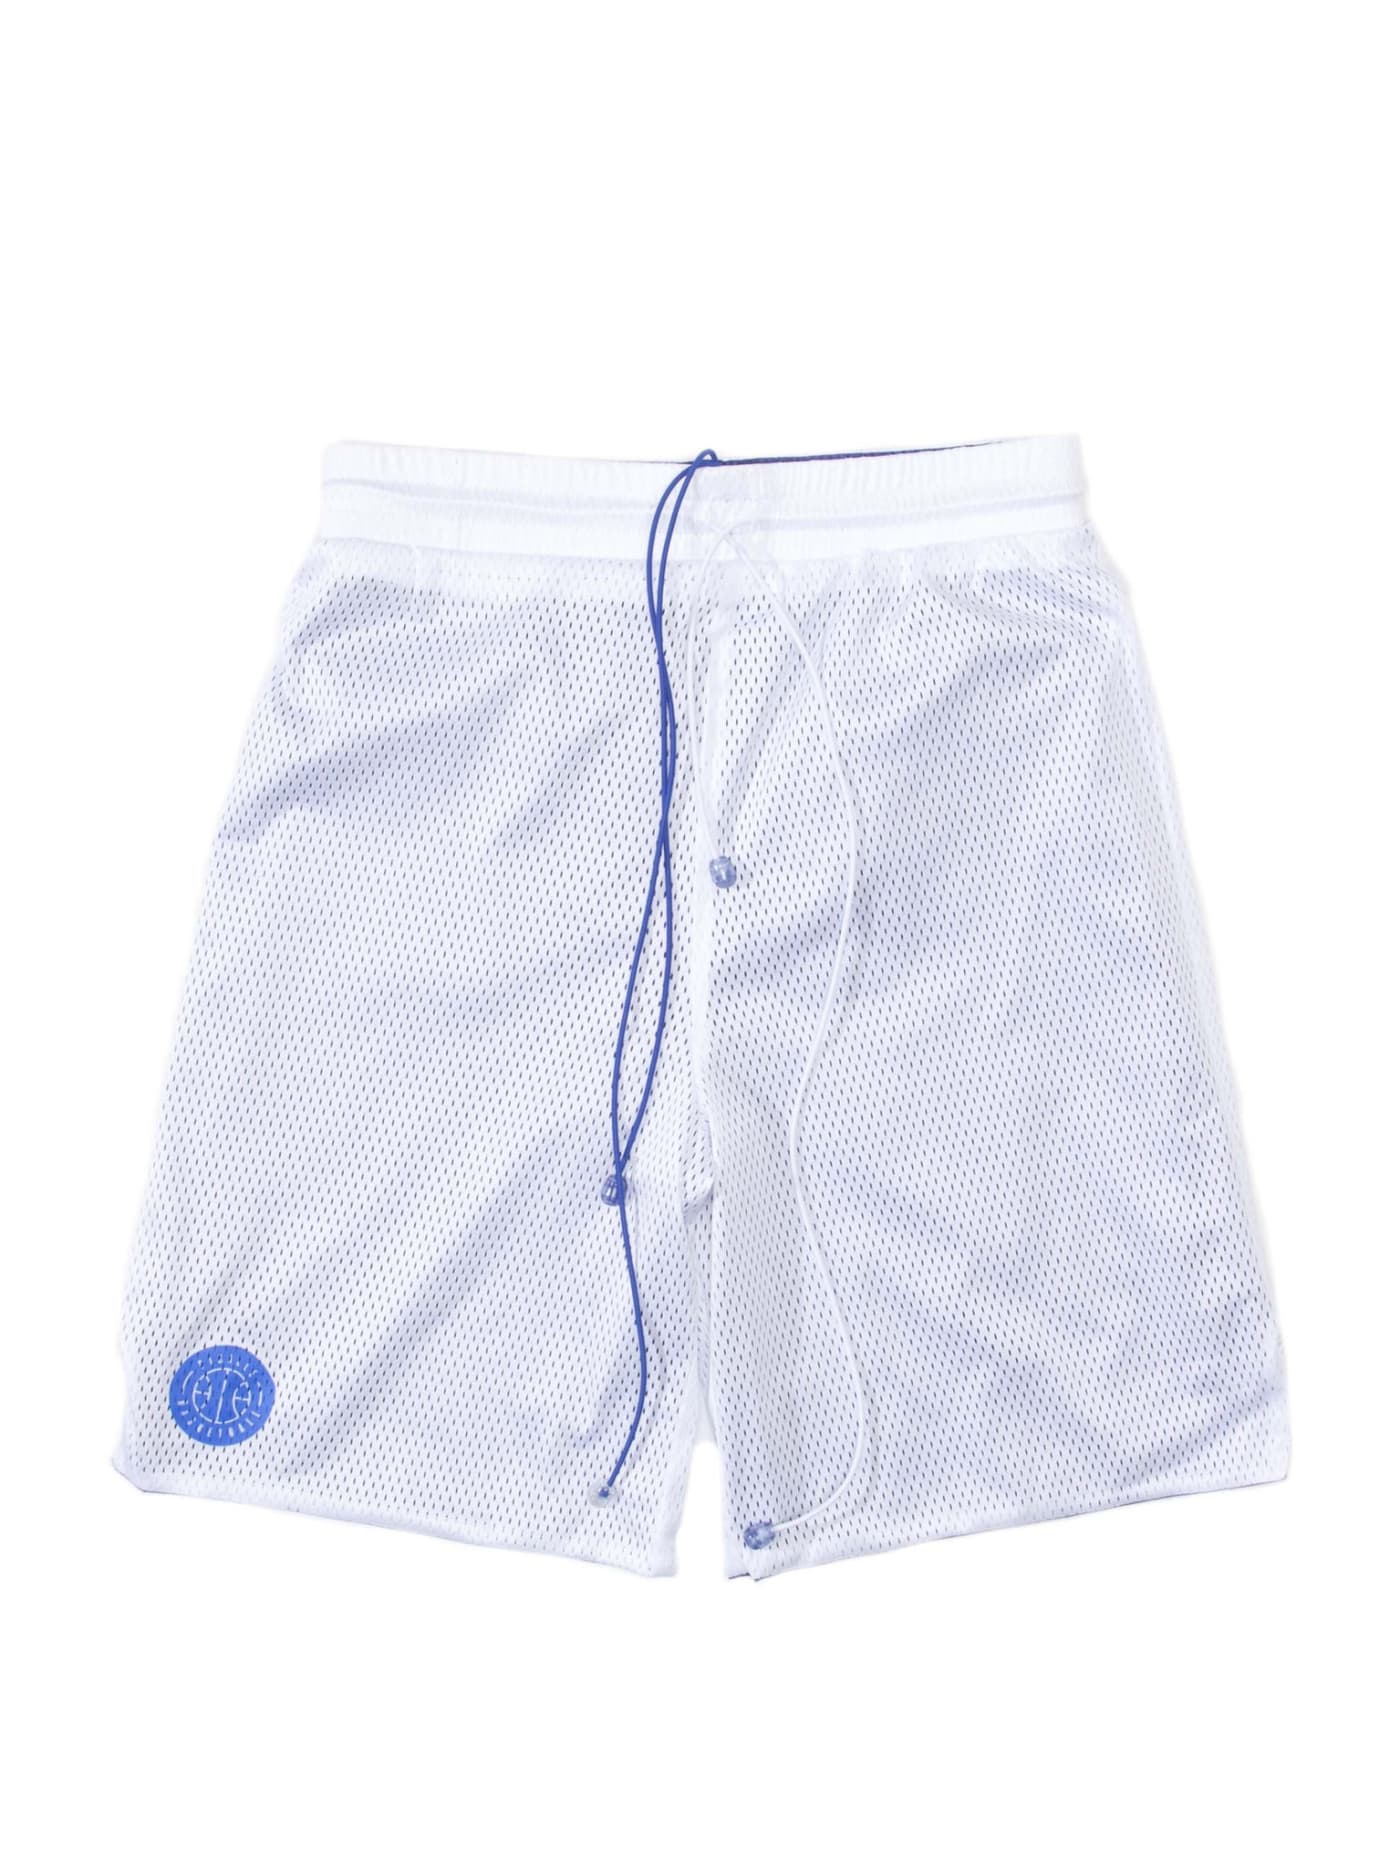 Pigalle’s $348 Mesh Shorts Are The Ultimate “Come Thru” Move | Complex